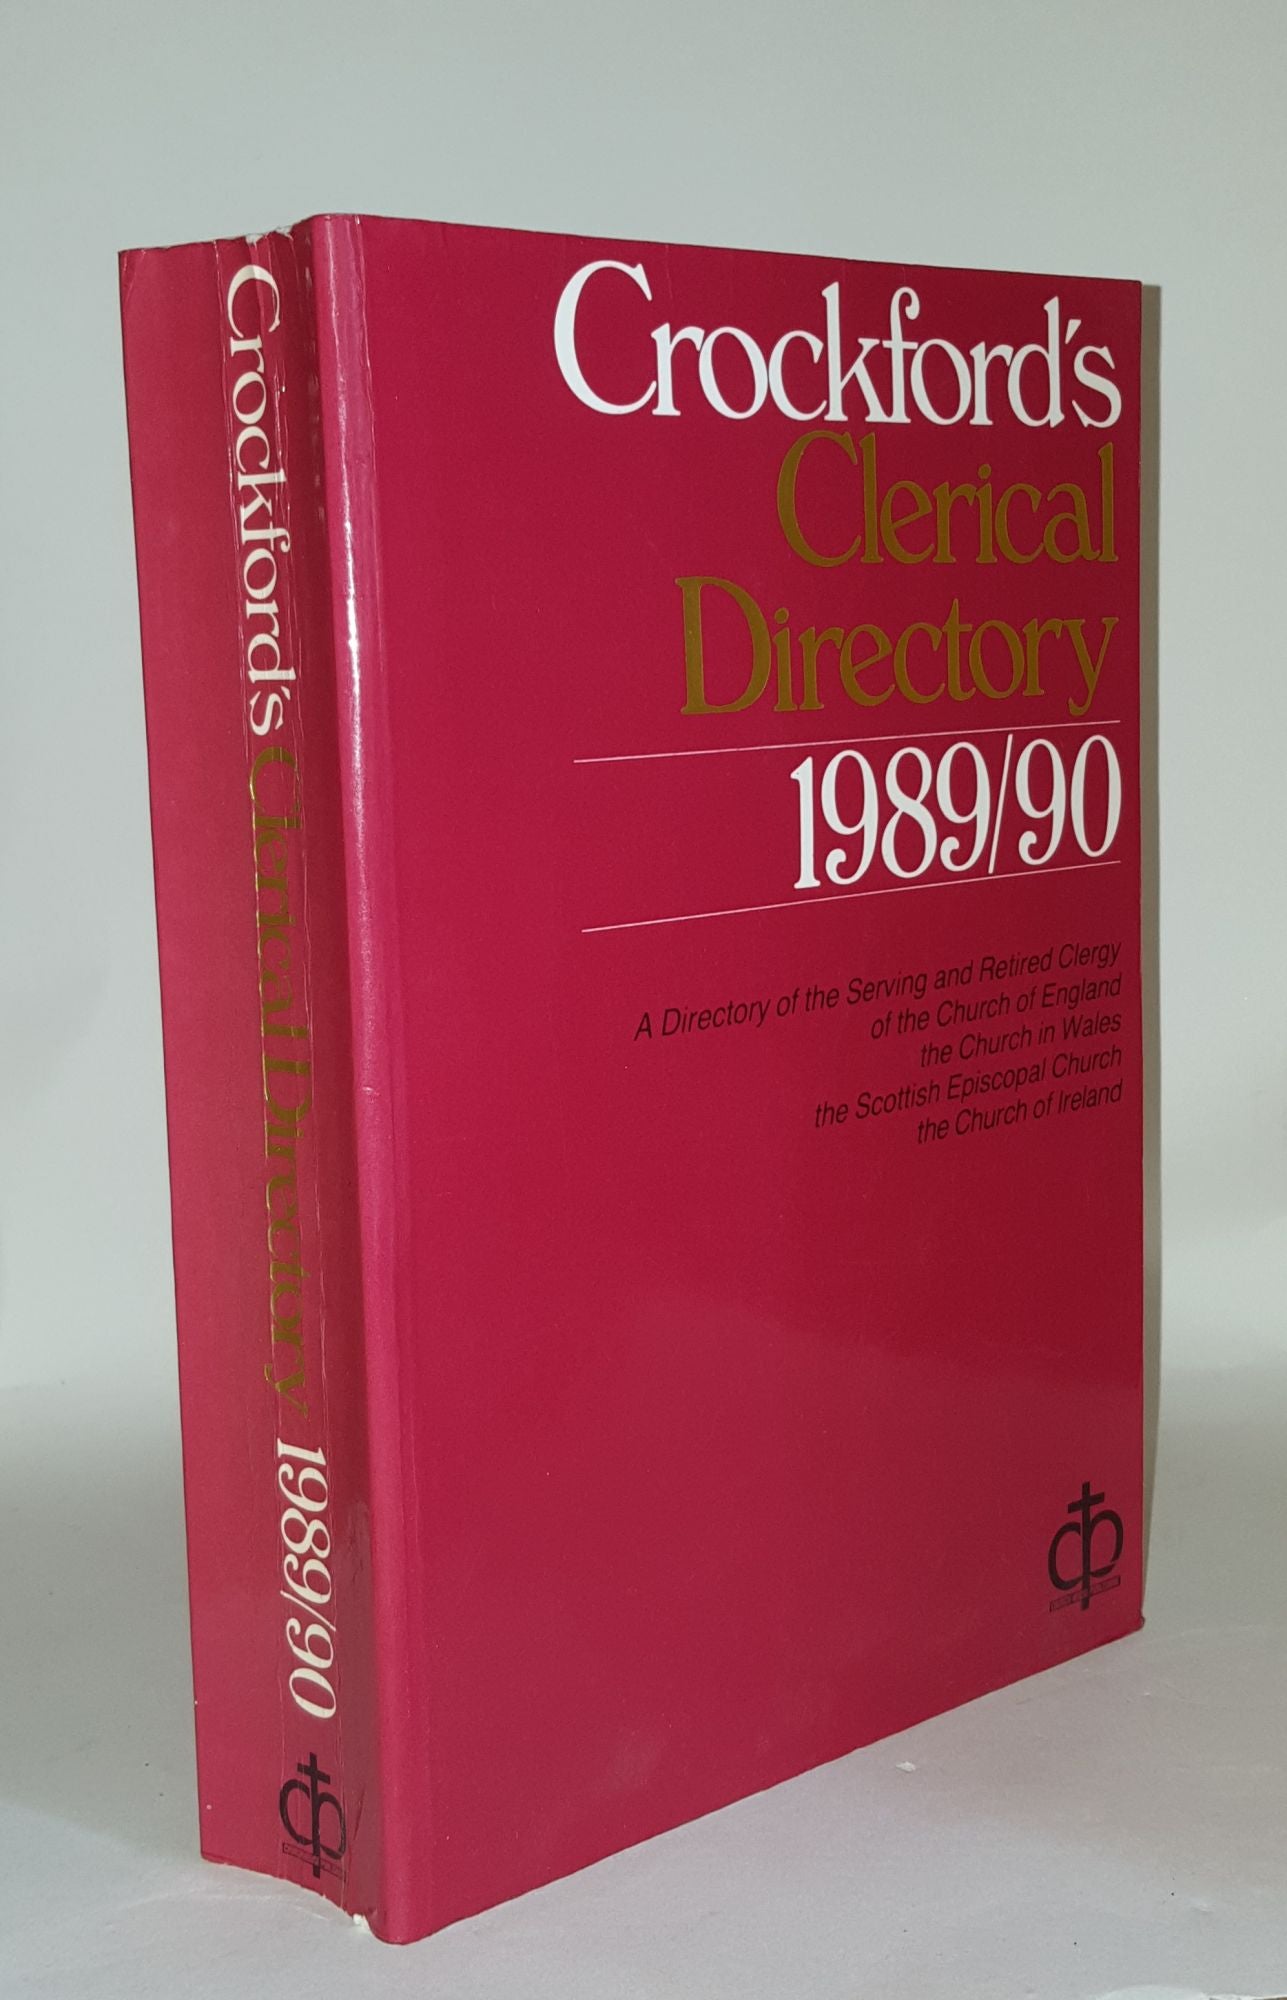 Anon - Crockford's Clerical Directory 1989-90